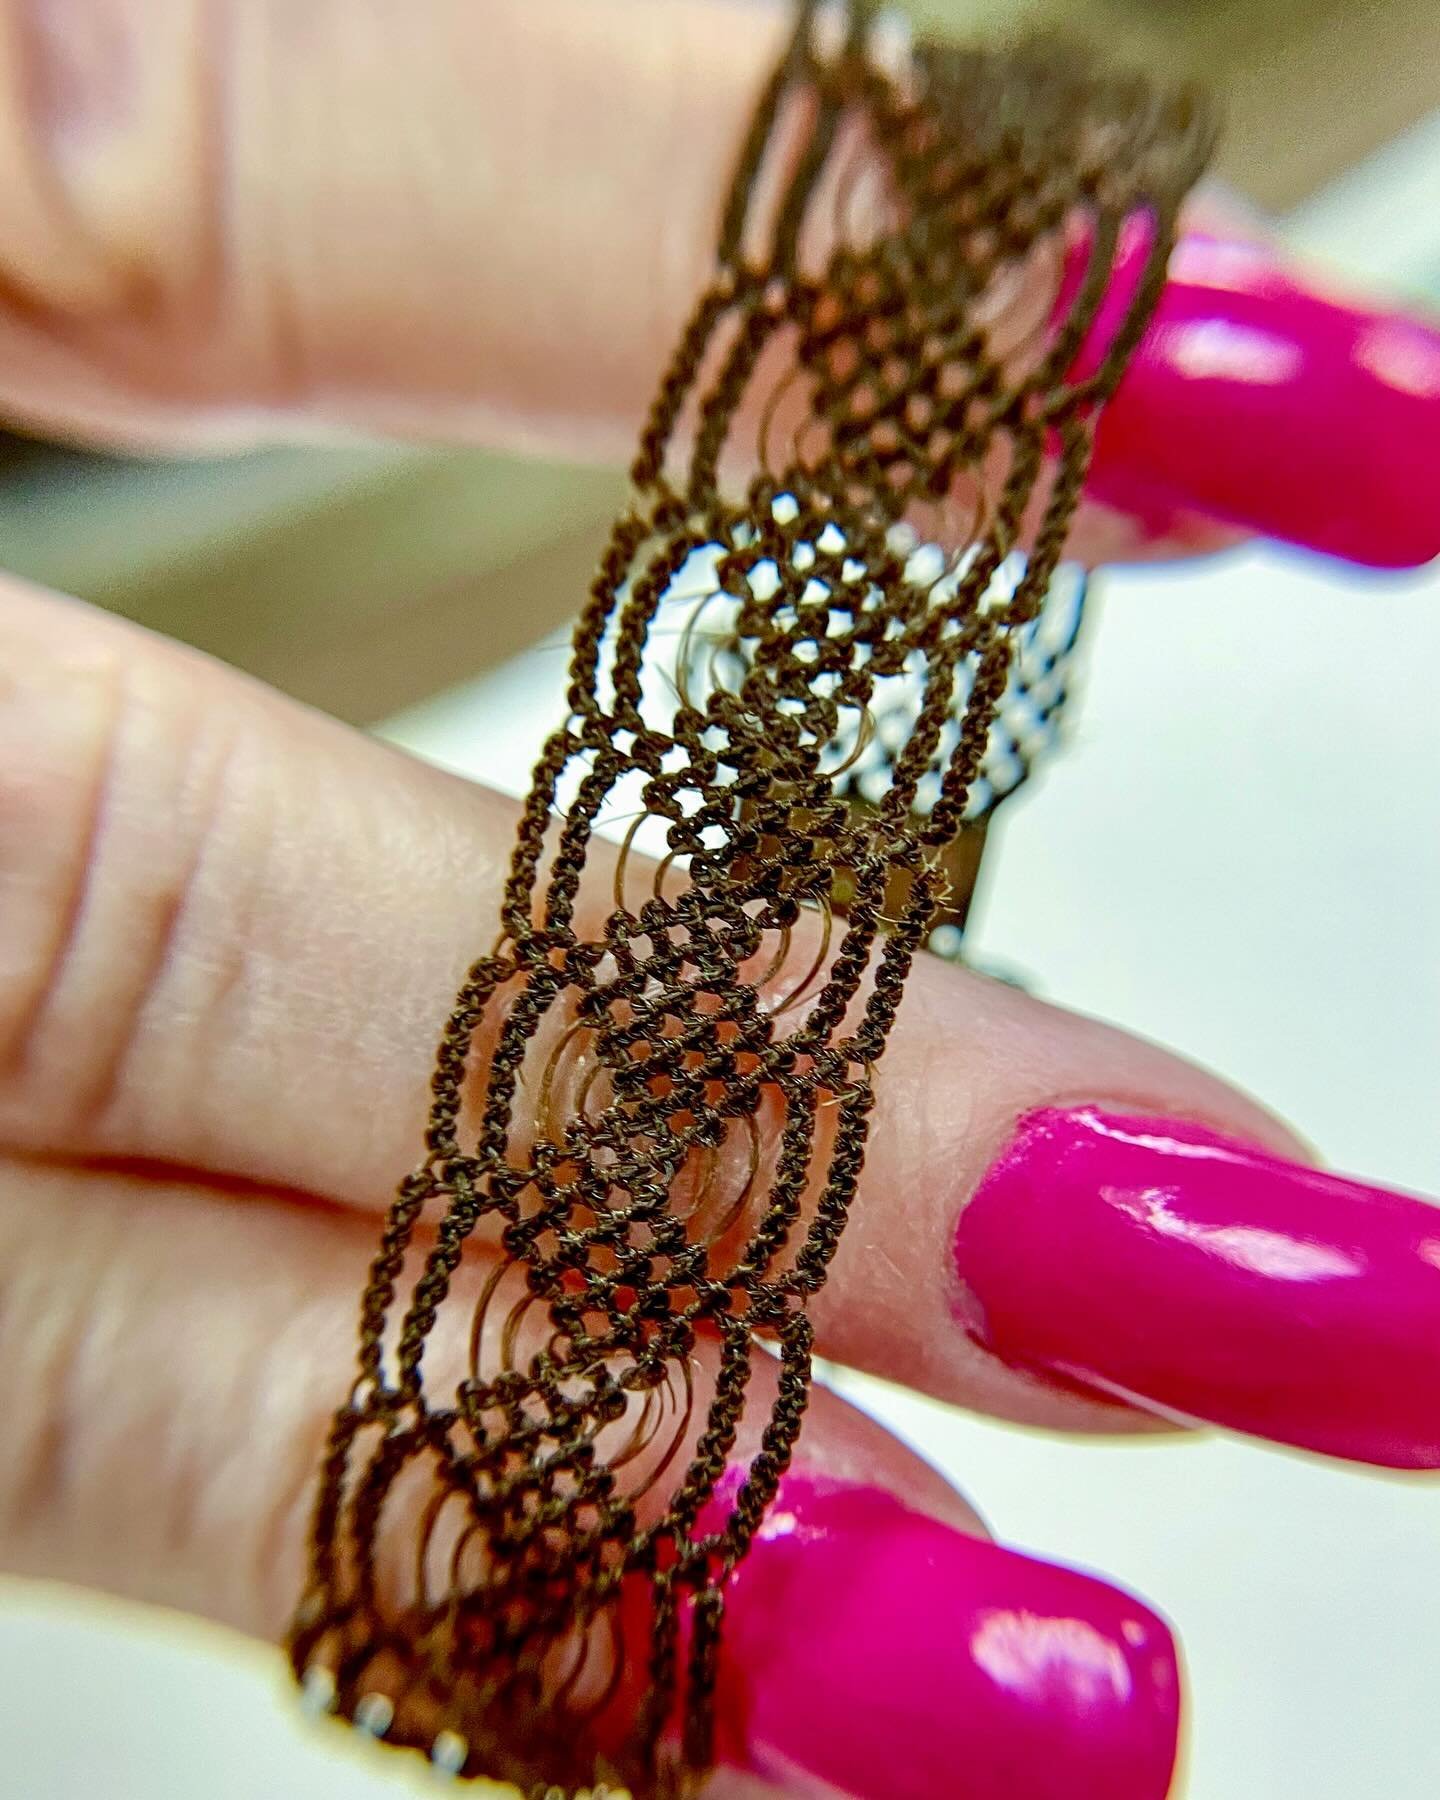 My favorite pieces at Leila&rsquo;s Hair Museum are the hair lace bracelets! 🌟 I really want to make one someday. This beauty is a rare survivor of a bygone era; they were so delicately constructed that very few examples survive today - thank you, L